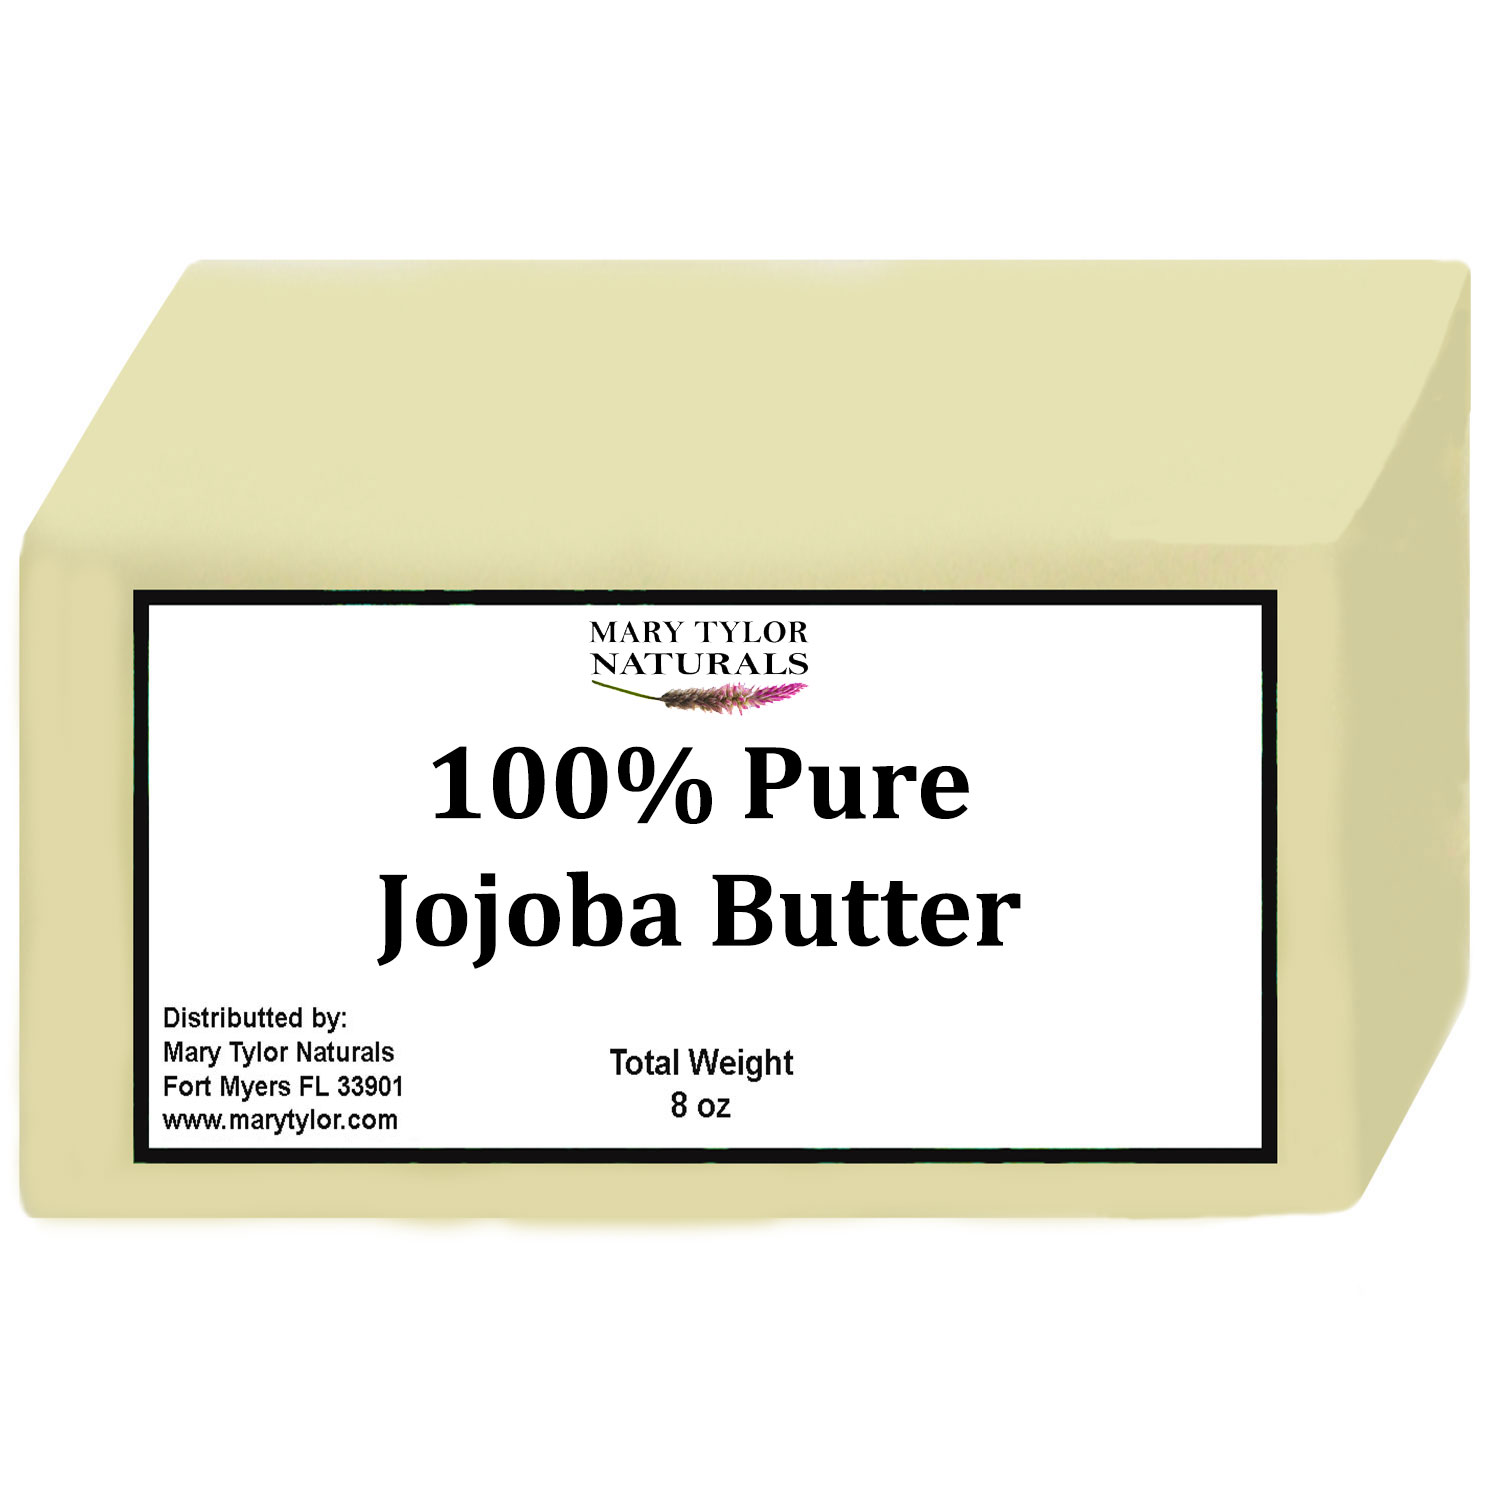 100% Pure and Natural Jojoba Butter 8 oz, Perfect for DIY Projects and Much More! By Mary Tylor Naturals, Unrefined Premium Grade - image 2 of 2